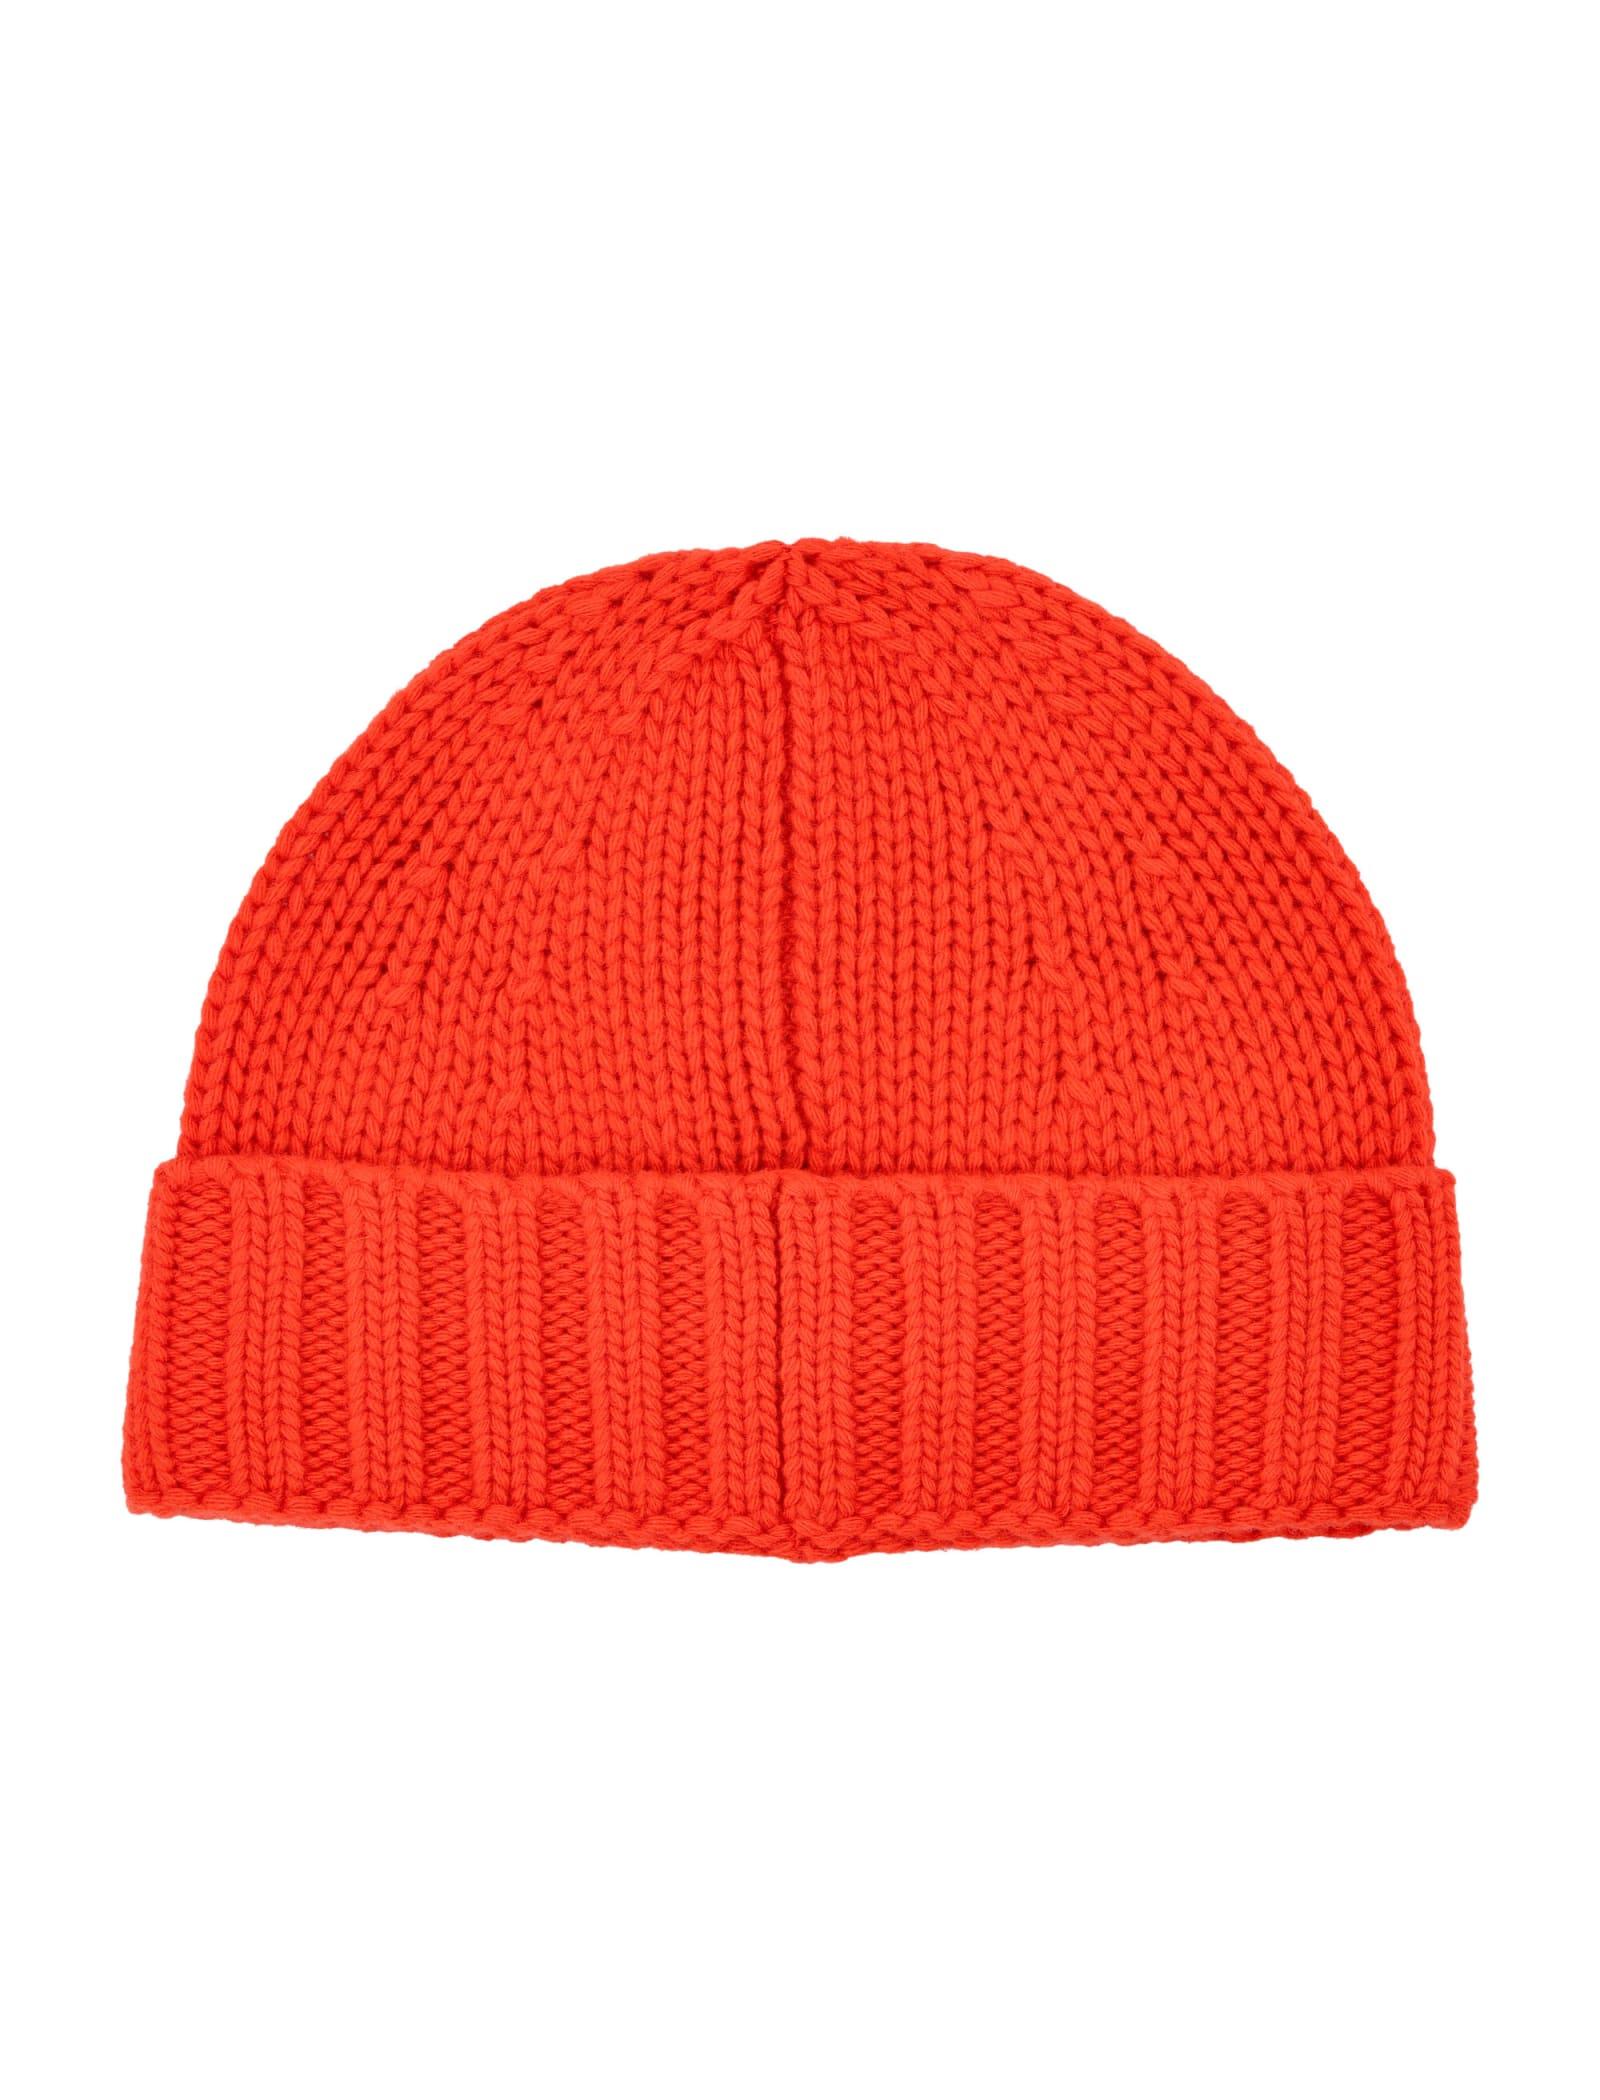 Stone Island Tone Island New Beanie in Red for Men | Lyst